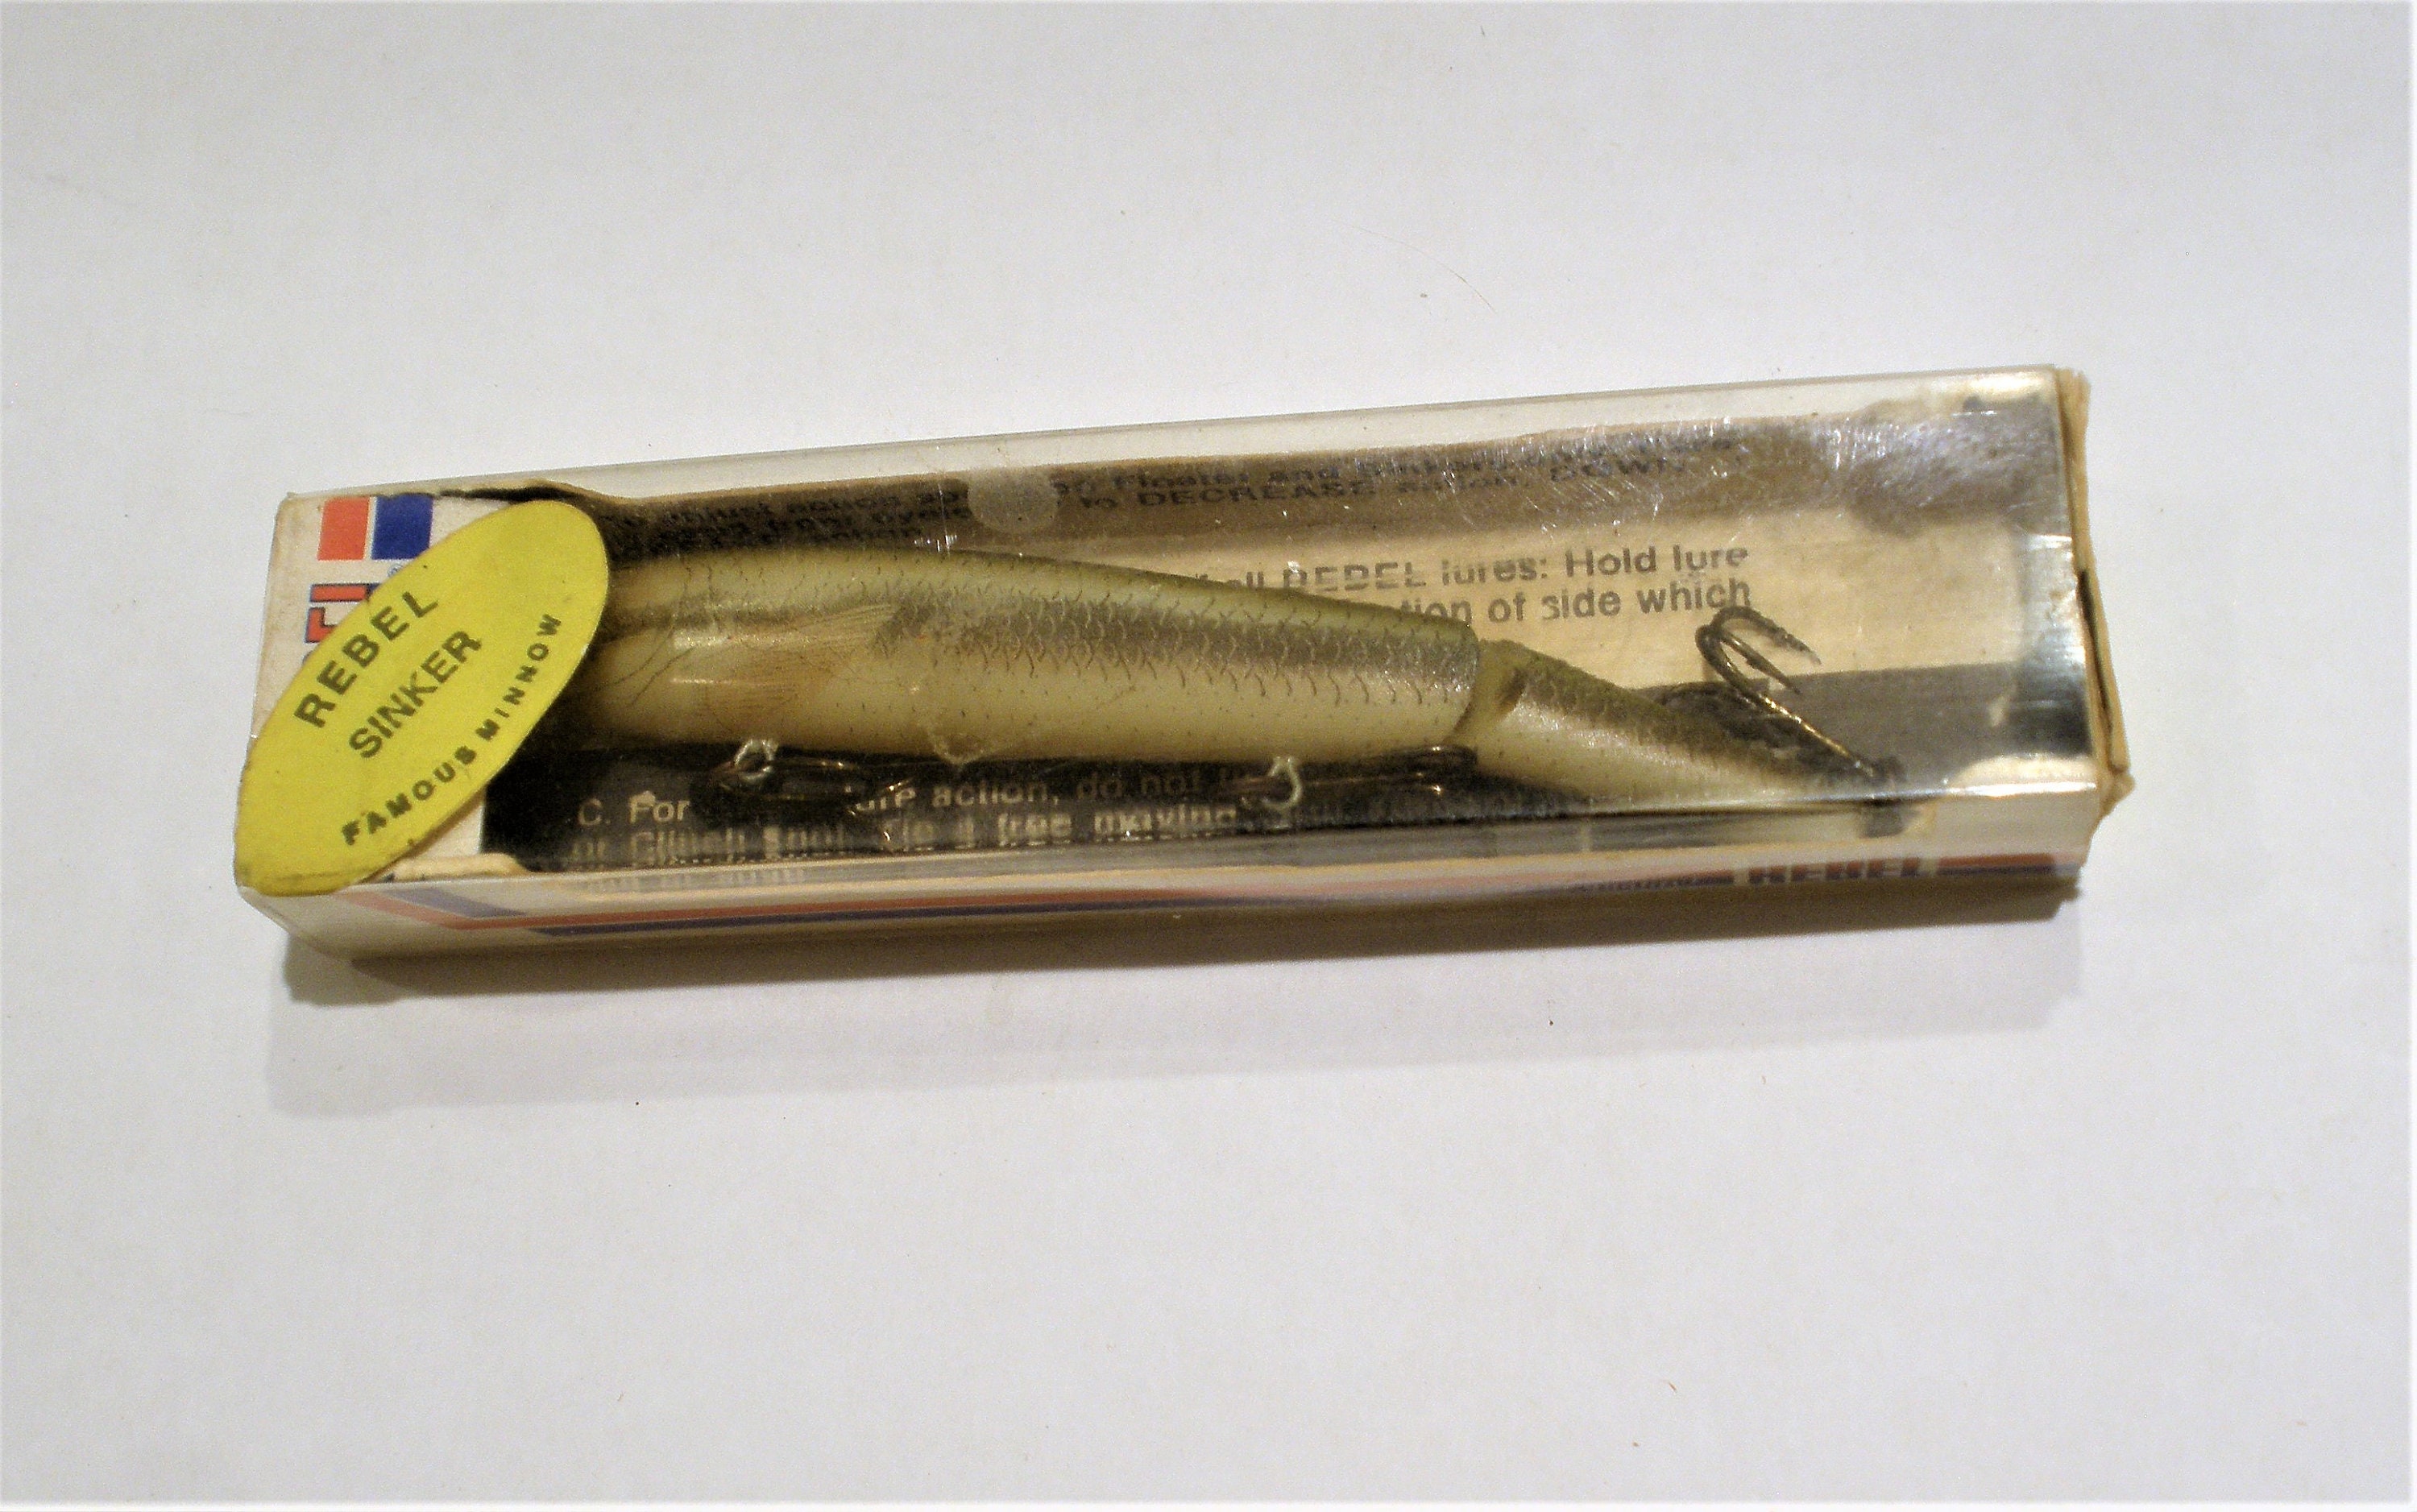 Vintage Rebel Lure / Rebel Broken-Back Minnow / New in Box / Famous Minnow  Lure / All Original / Rebel Sinker / Collectible / Gift Item